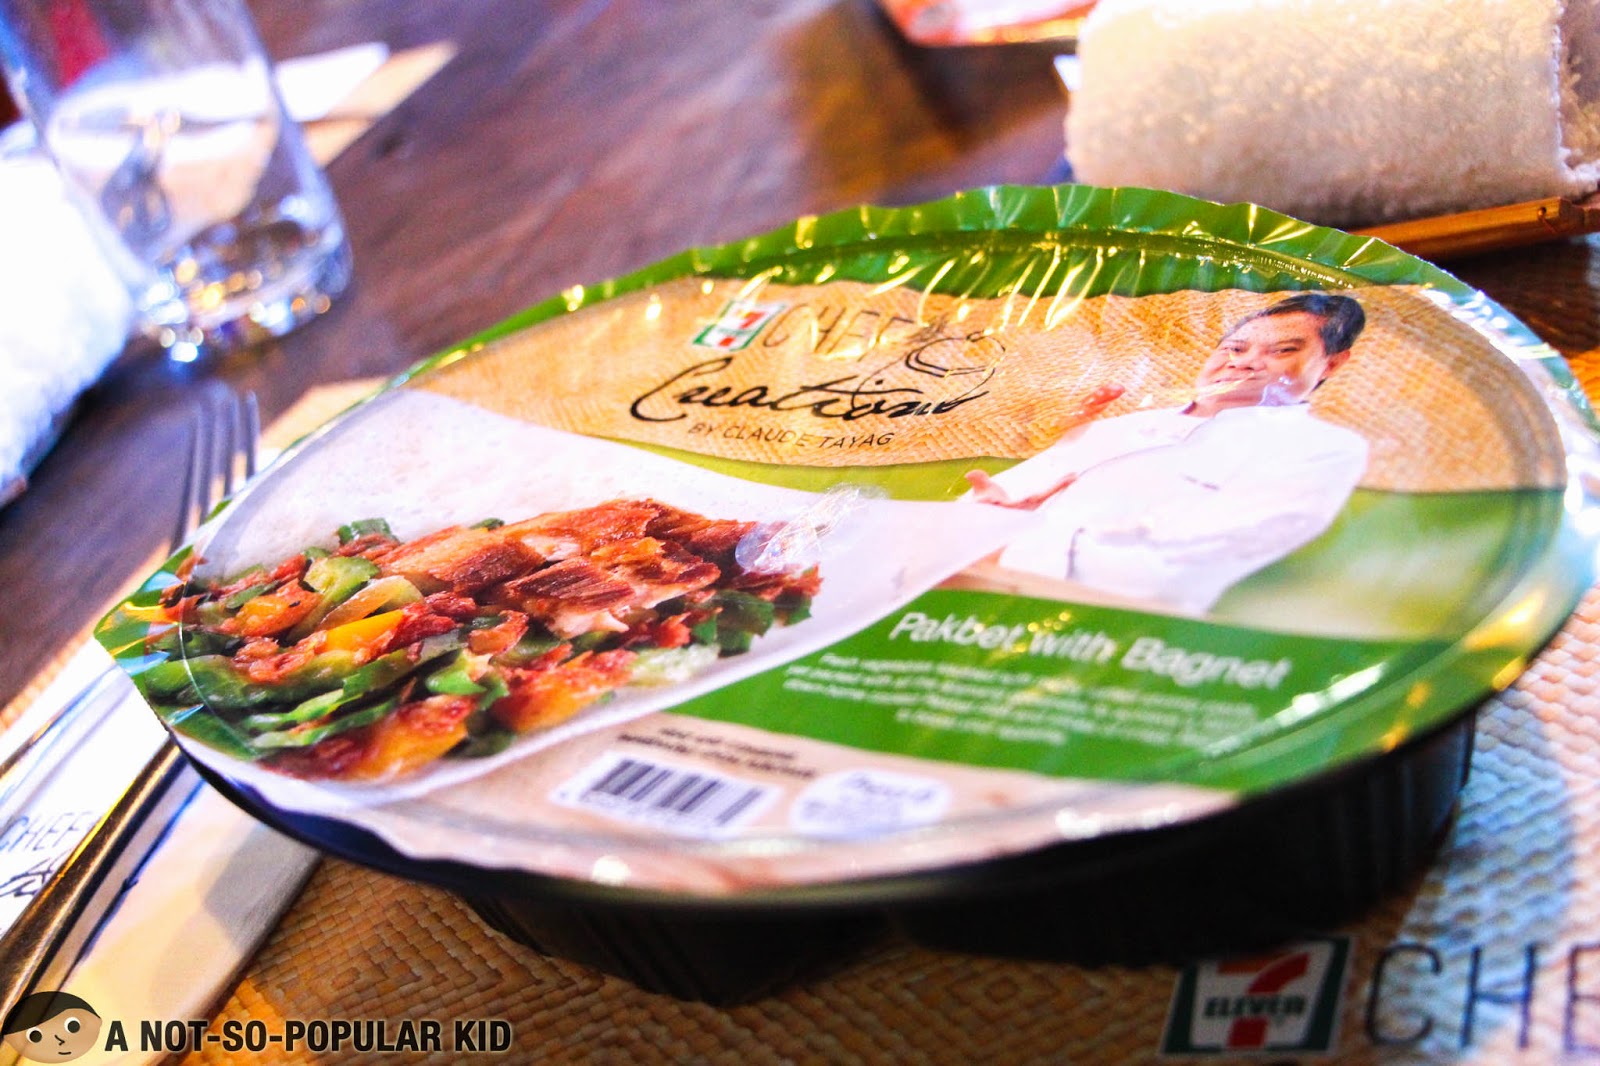 The Pakbet with Bagnet of 7 Eleven's Chef Creations